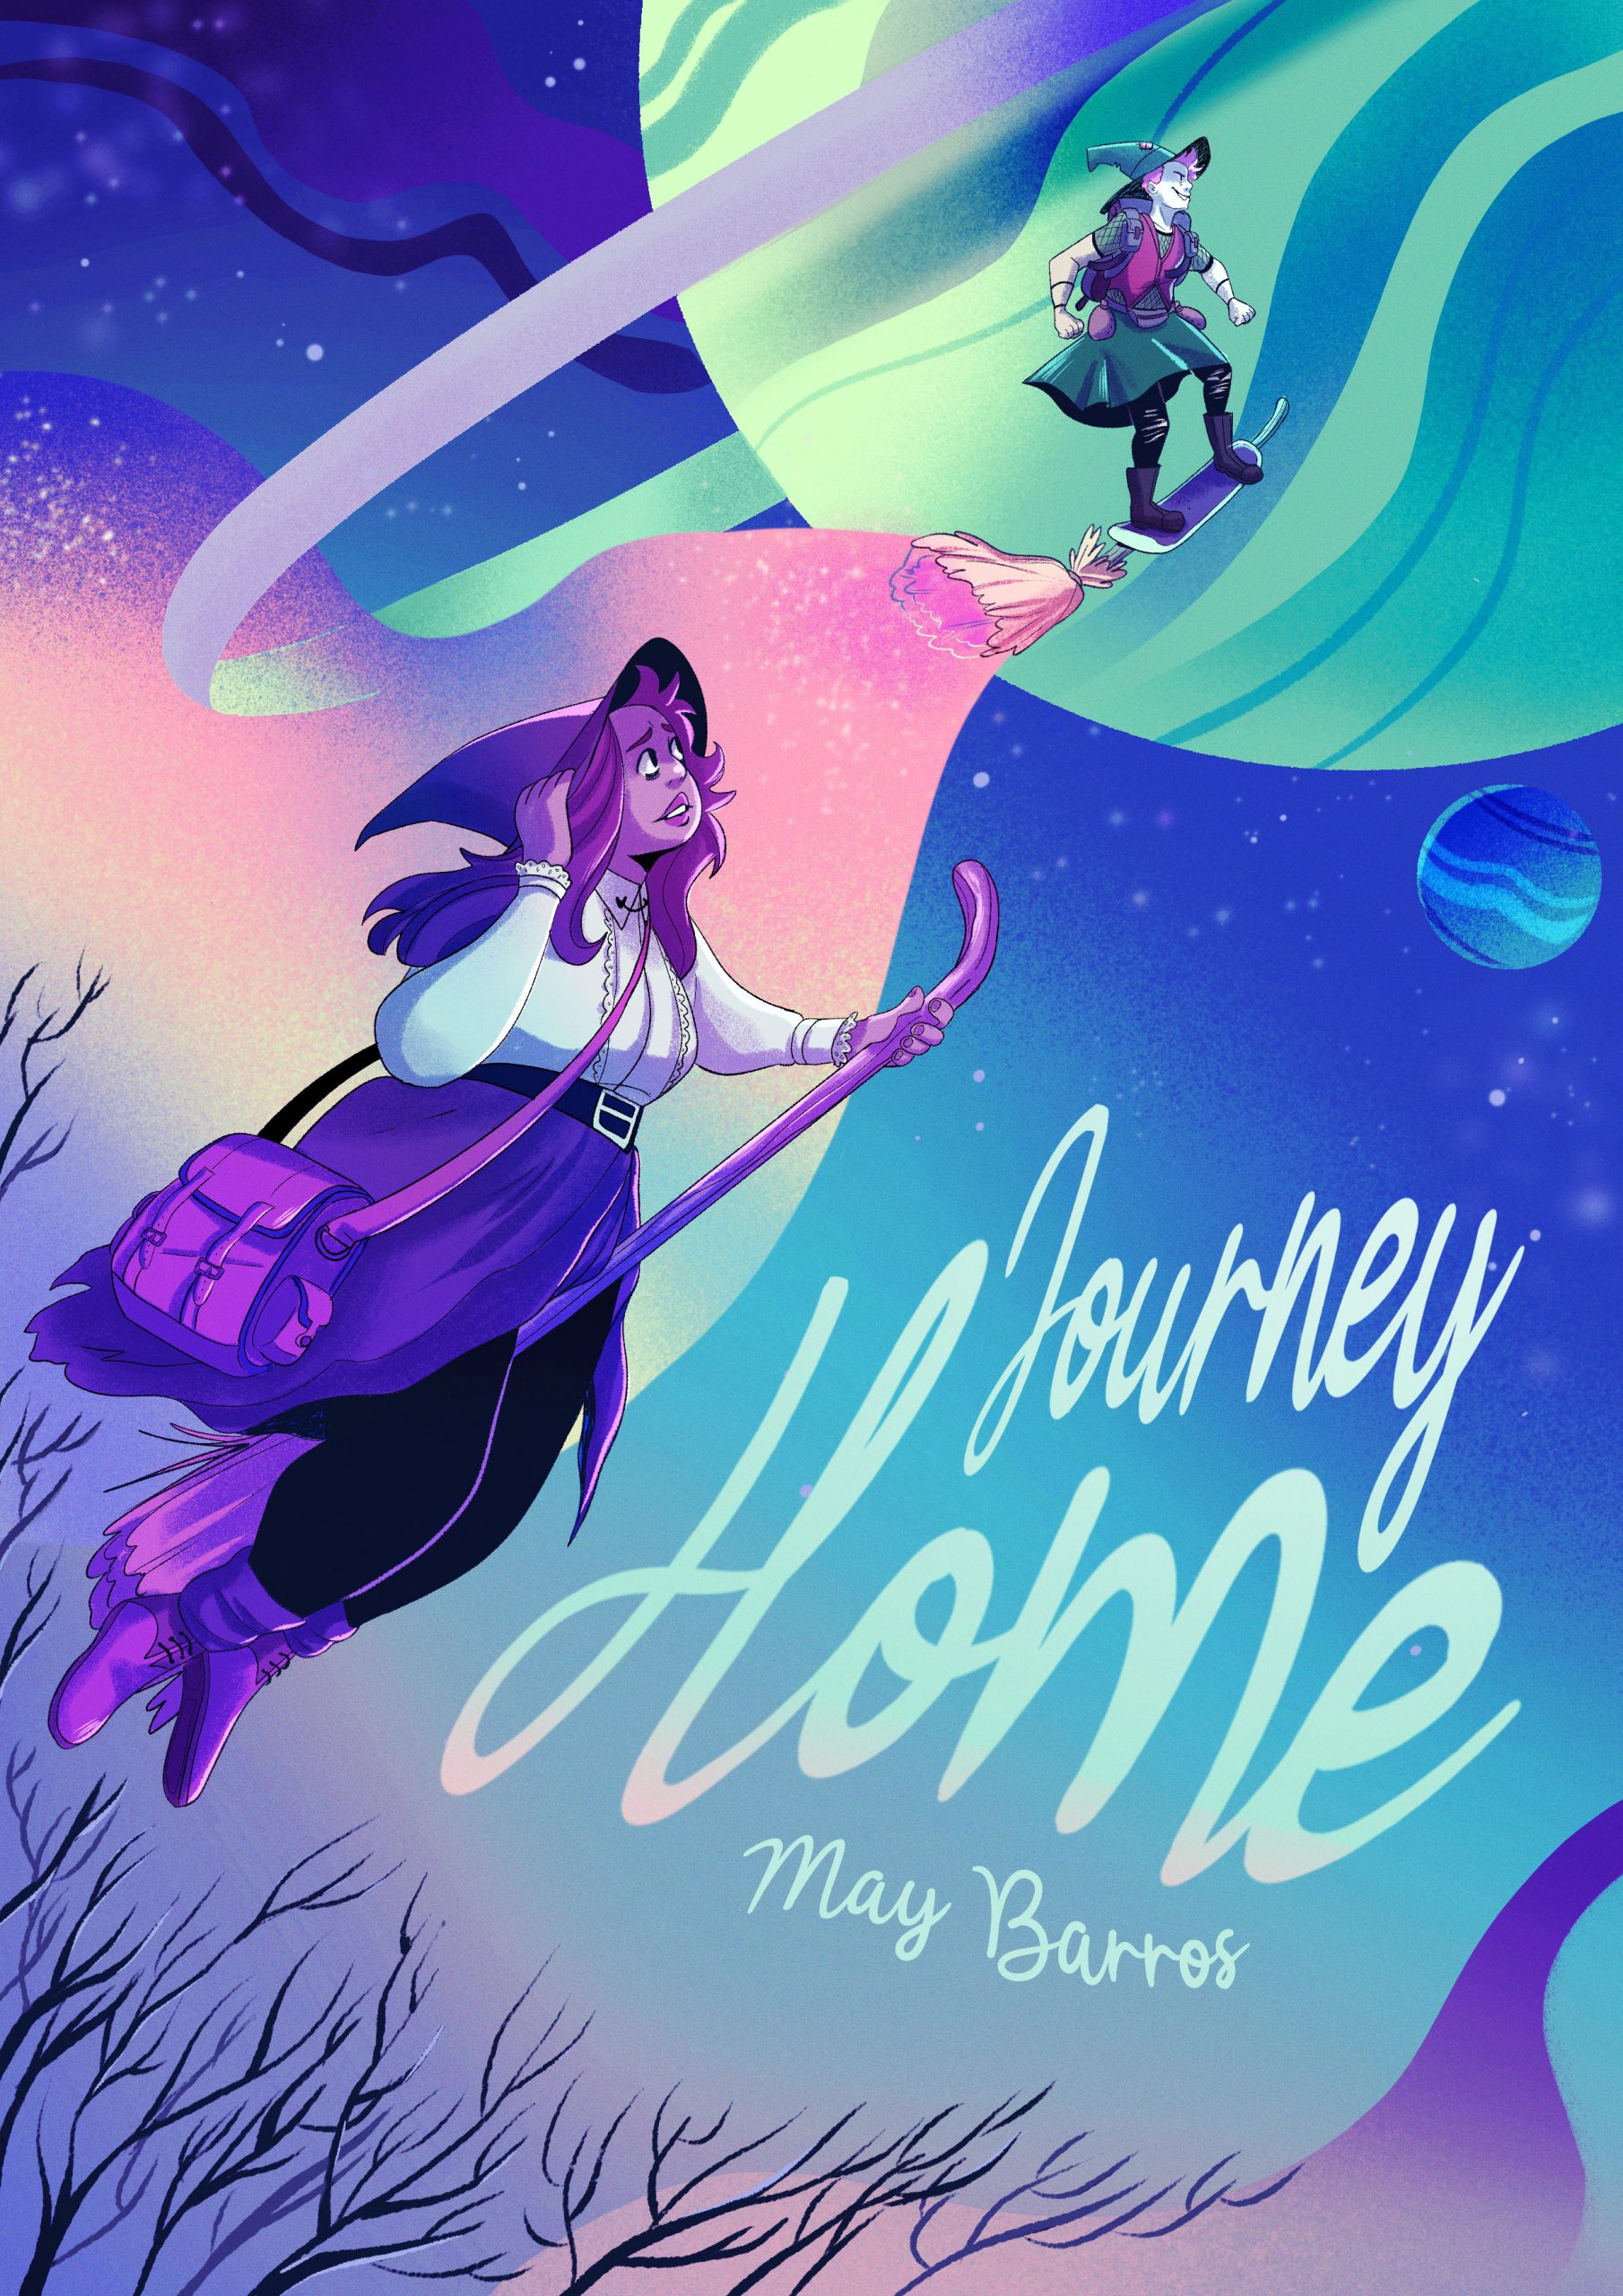 The cover of Journey Home shows Amara, a fat witch with long brown hair with a concerned expression, flying on a broom after Luiza, a skinny witch with short ginger hair, who is on the background with a mischievous grin flying in a skate-broom. The background shows two planets.